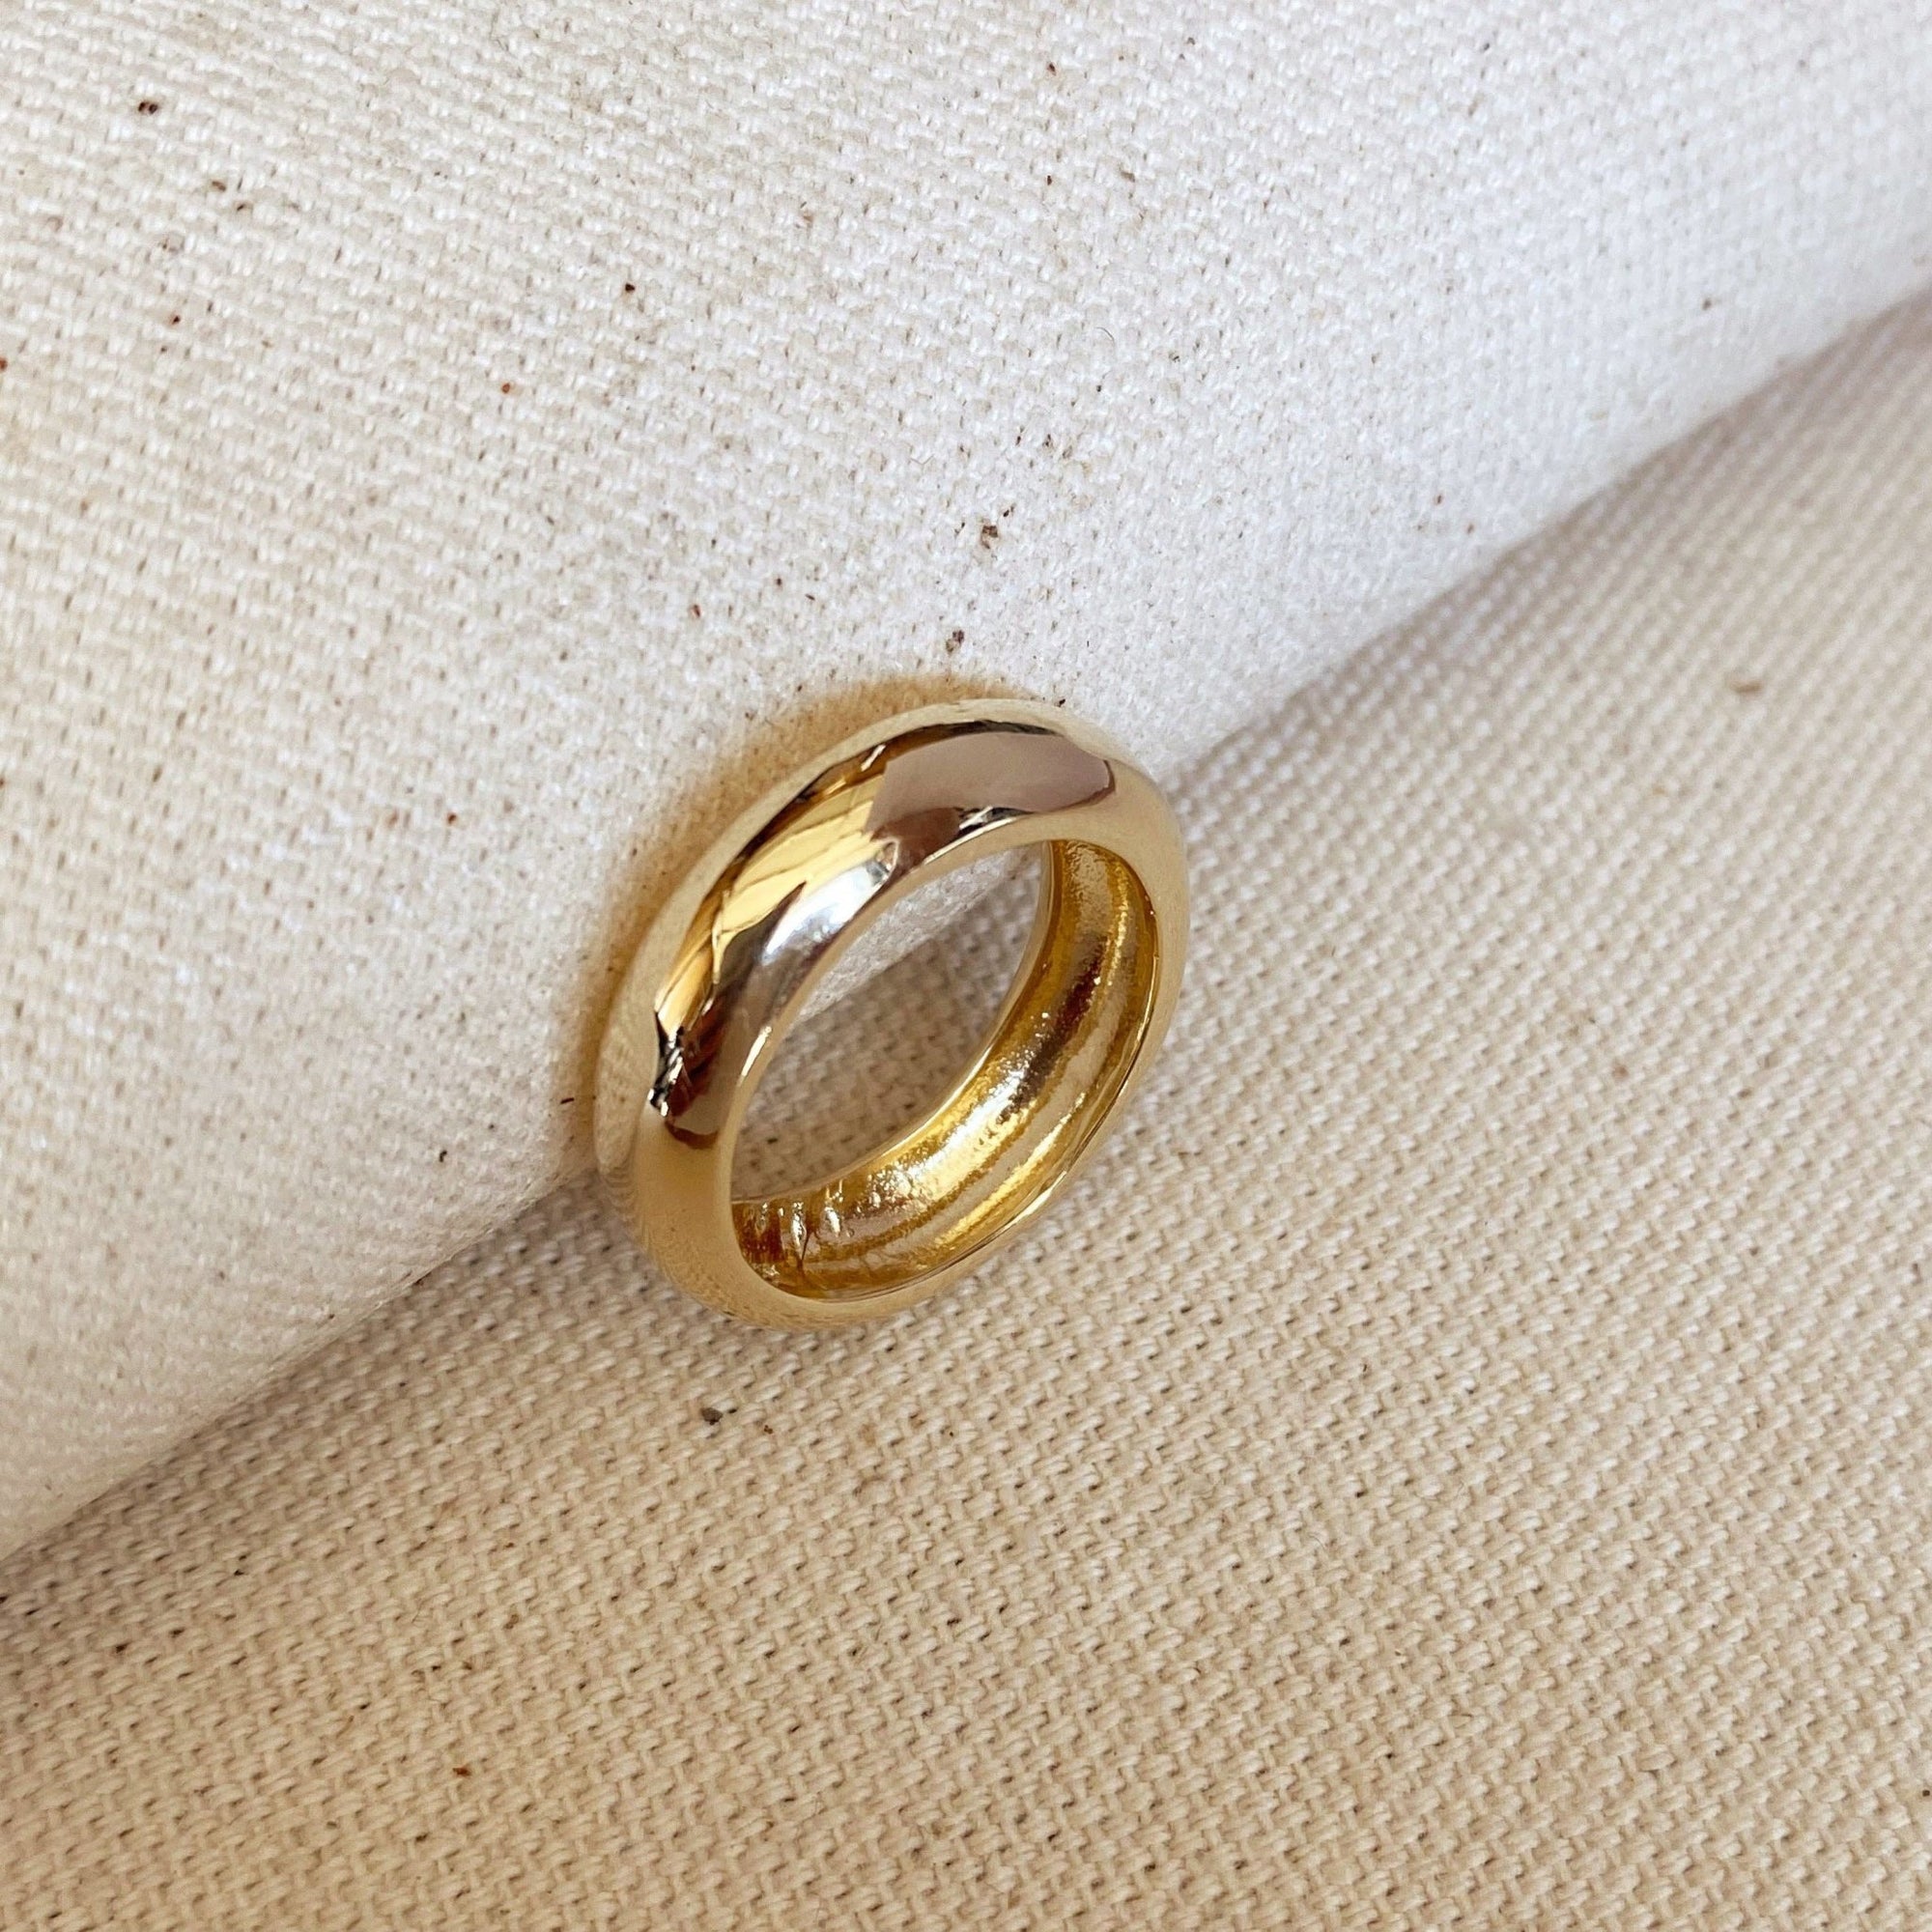 Rounded Band Ring, 18k Gold Filled, Abigail Fox